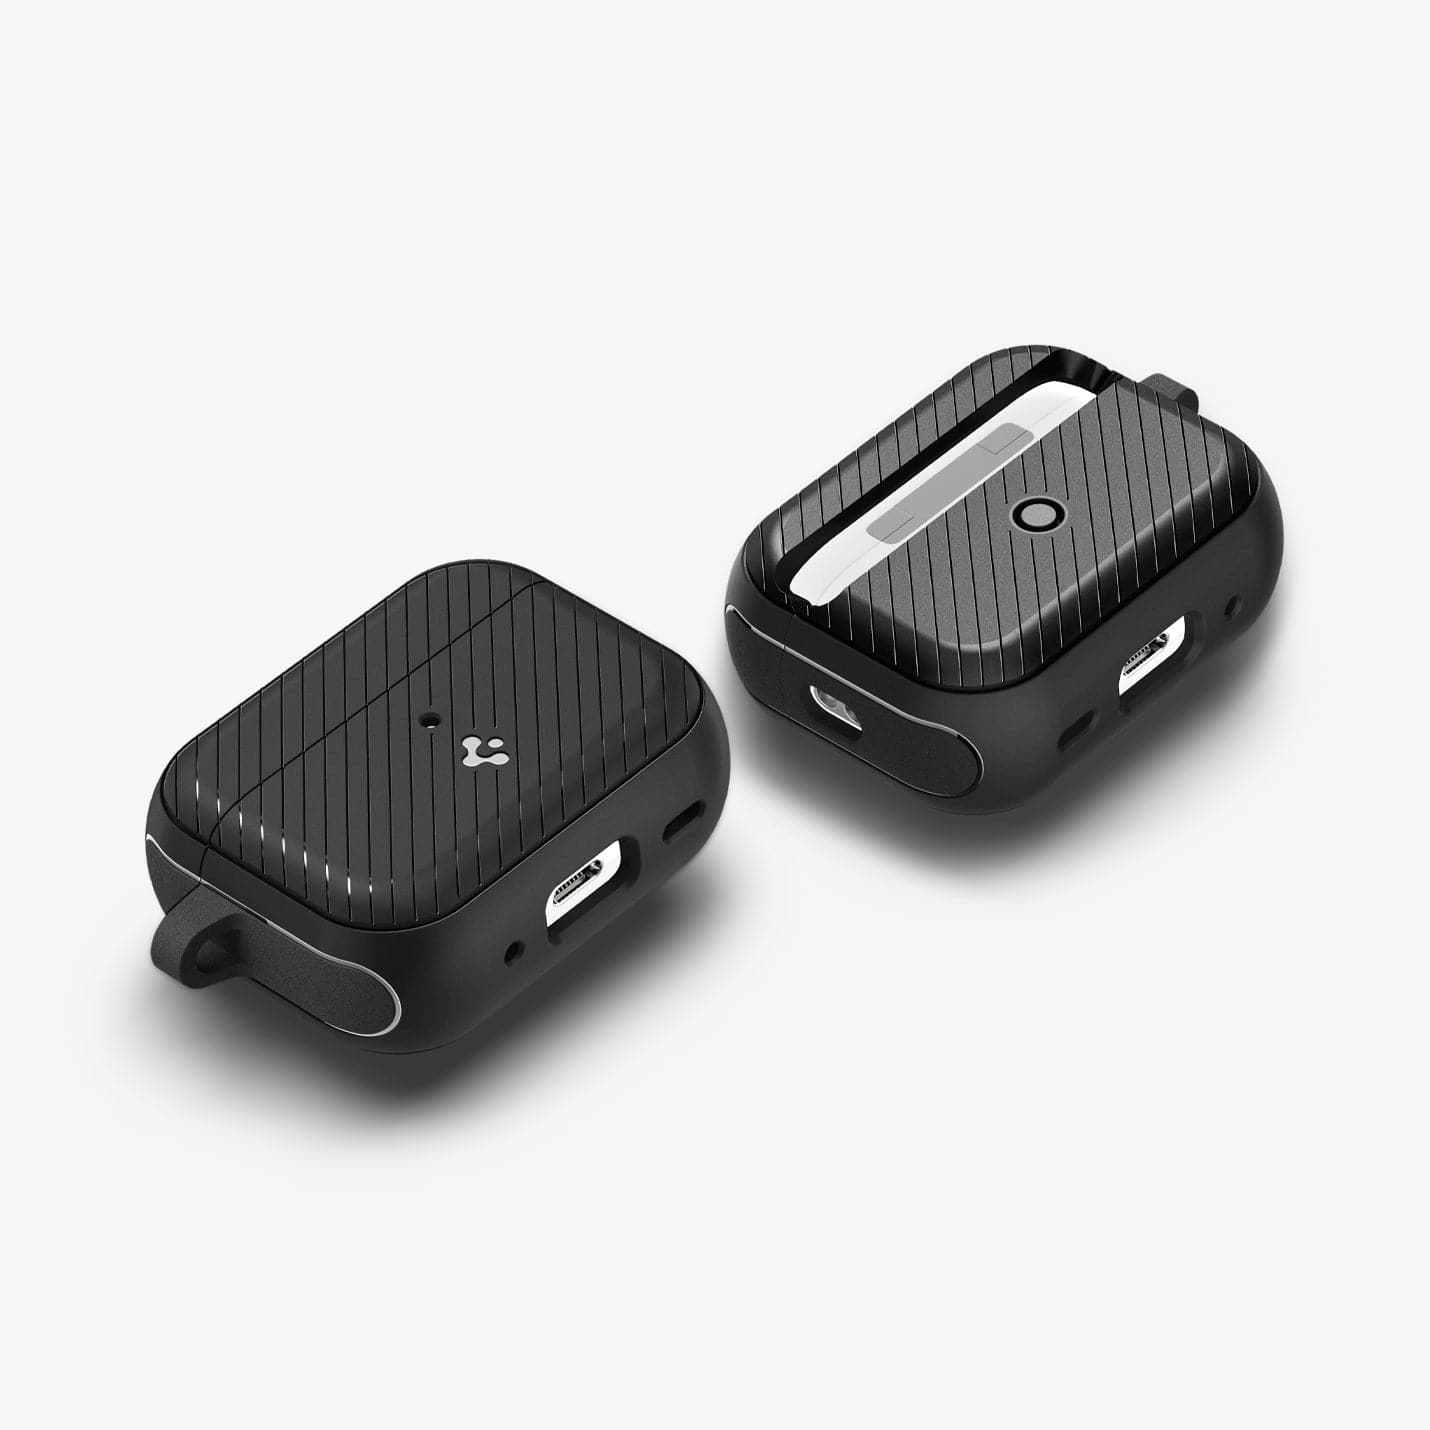 ACS05484 - Apple AirPods Pro 2 Case Mag Armor (MagFit) in matte black showing the front, back and sides